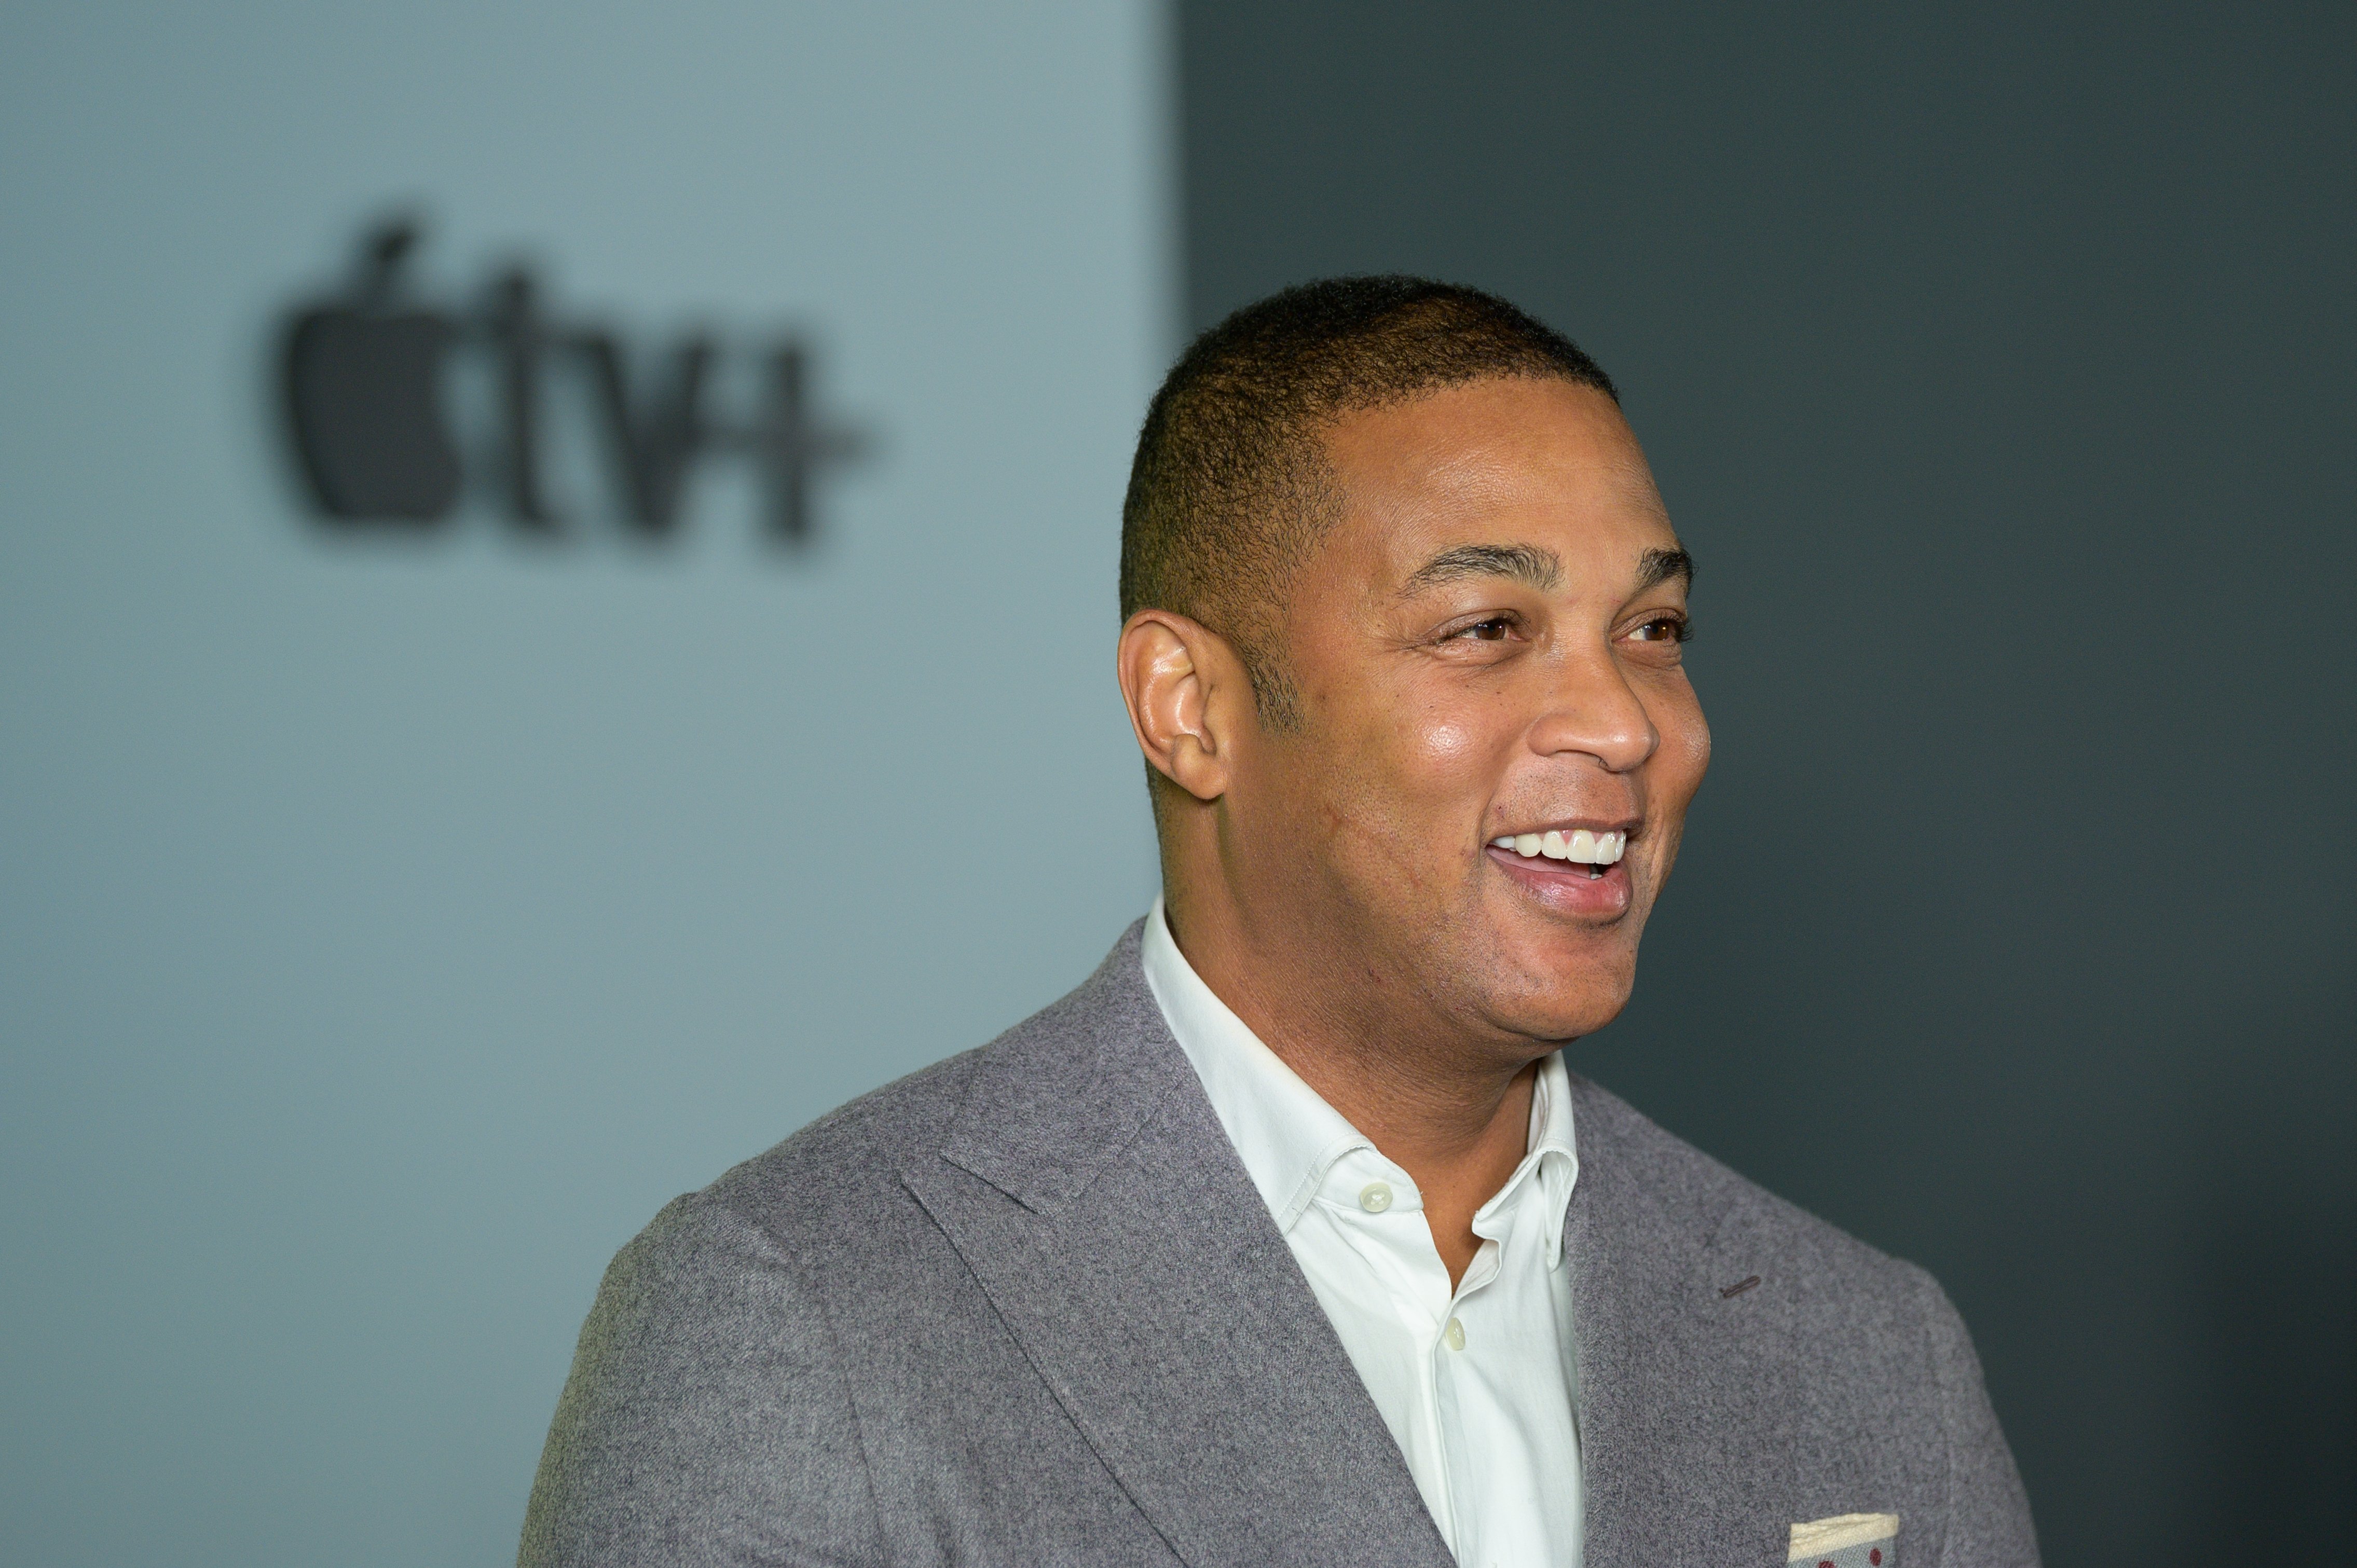 Don Lemon at Apple TV+'s "The Morning Show" world premiere on October 28, 2019 in New York City. | Source: Getty Images